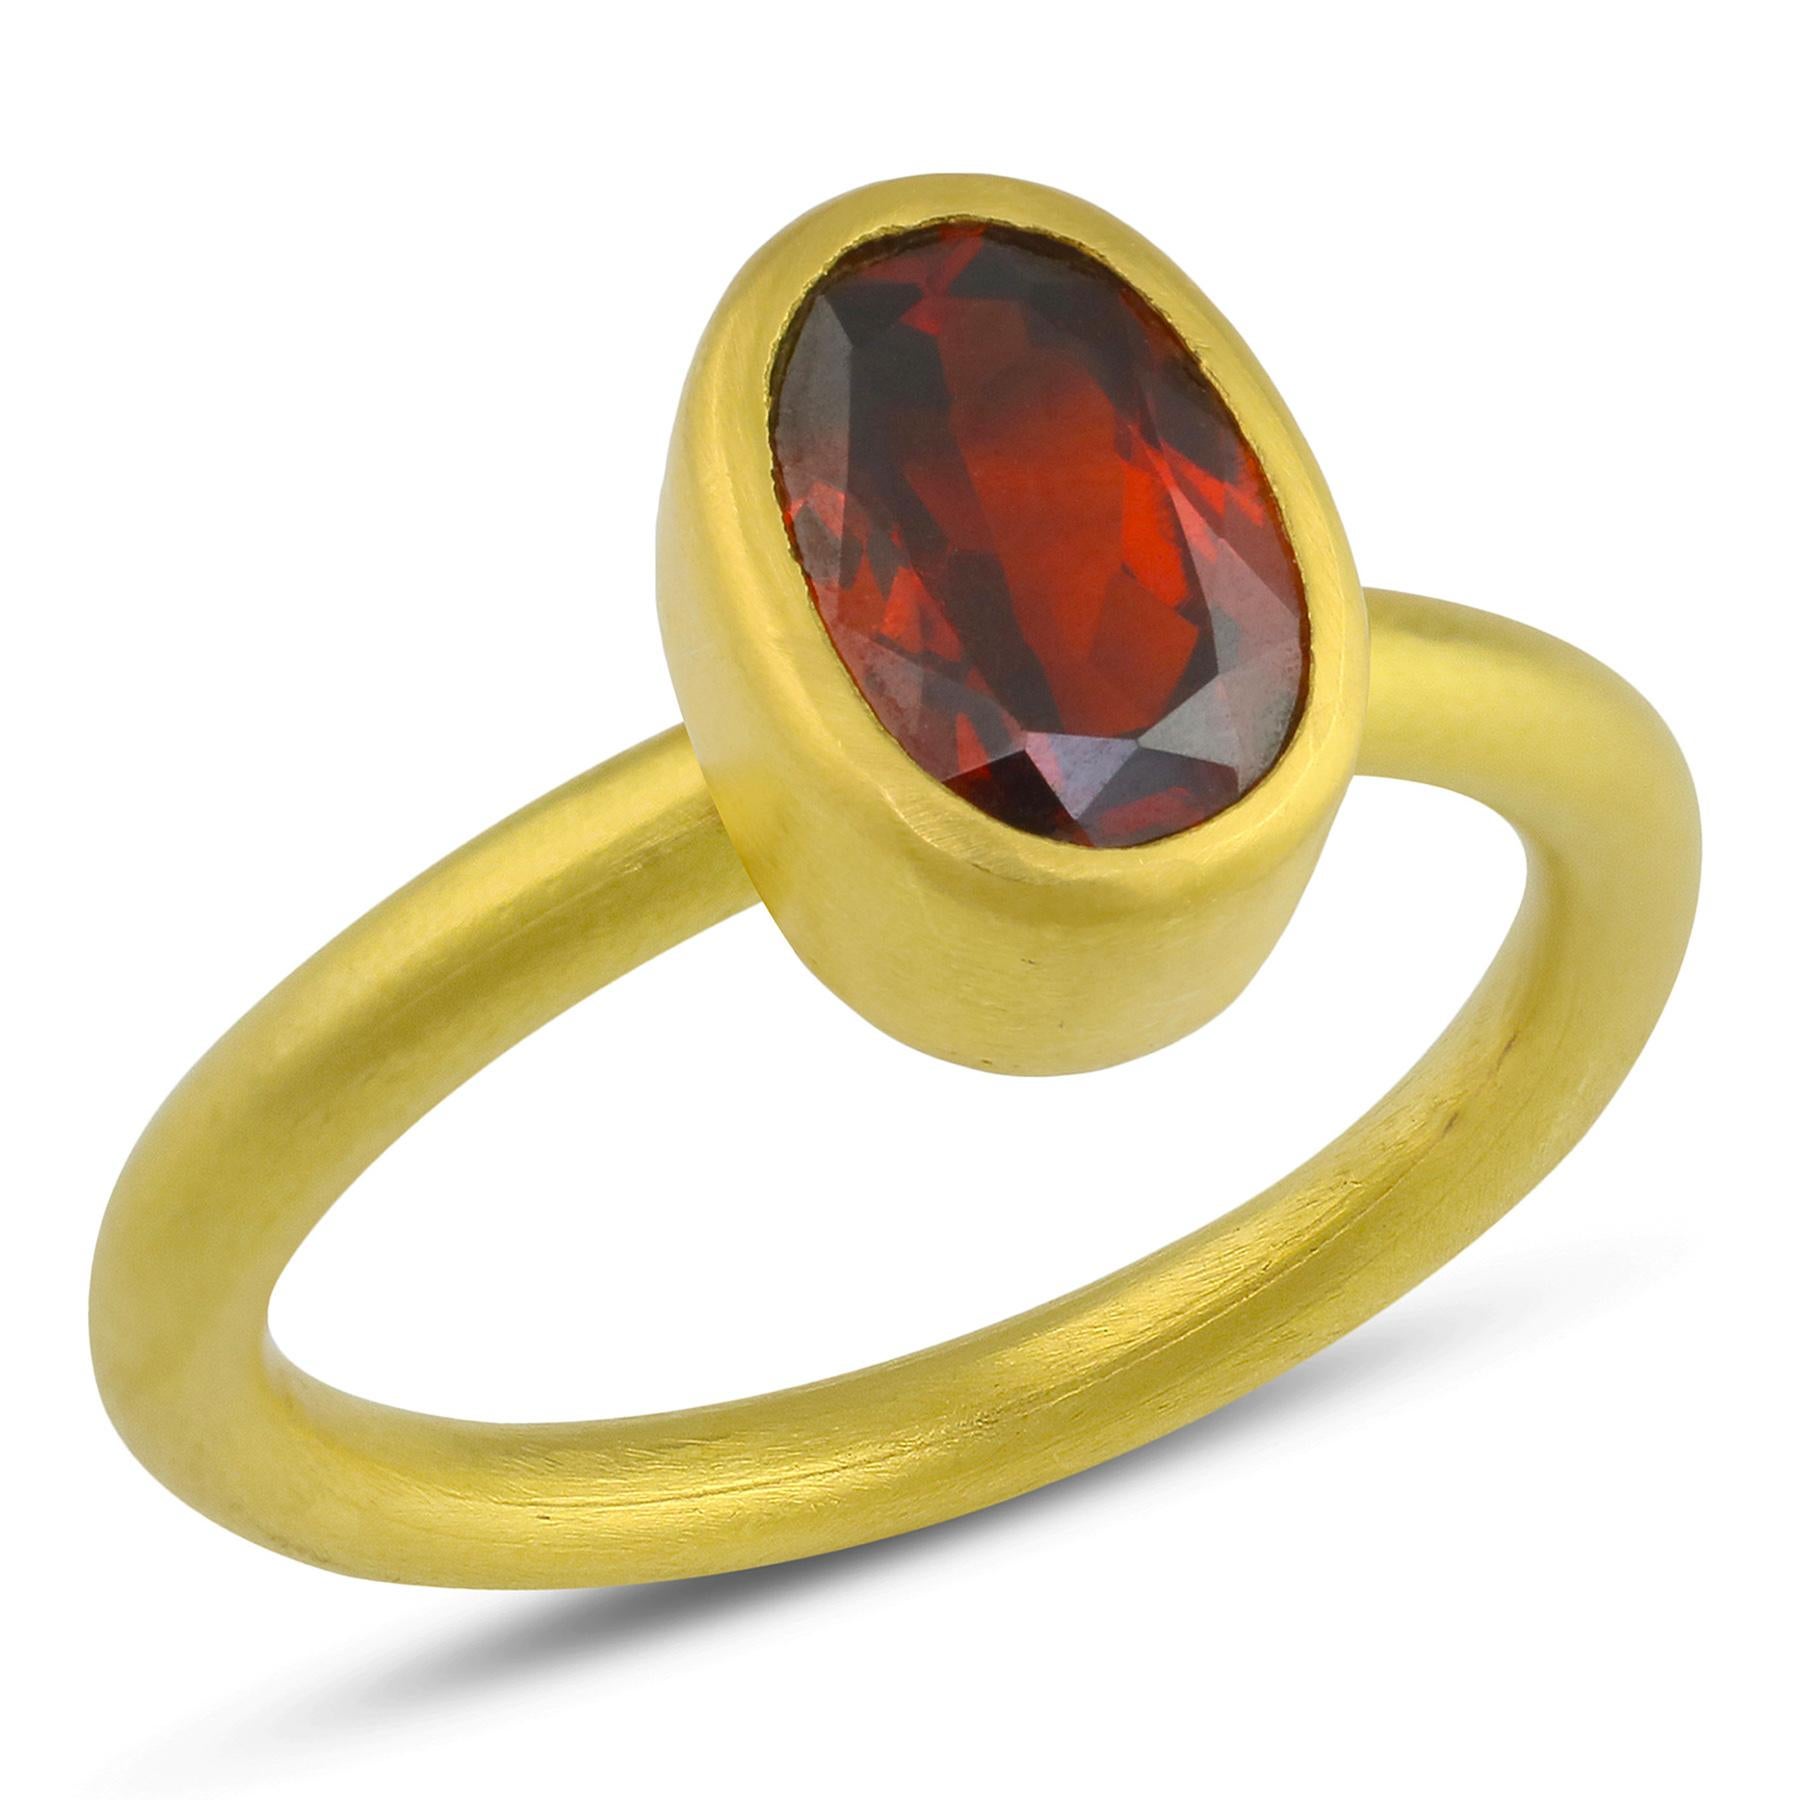 PHILIPPE-SPENCER -   2.4 Ct. Faceted Rare Deep Orange Spessartine Garnet wrapped in 22K Gold Bezel with Solid Round 20K Gold Ring. Brushed Matte Finish. Size 6 3/4, and is in-stock and ready to ship. Our apologies in advance, this One-Of-A-Kind